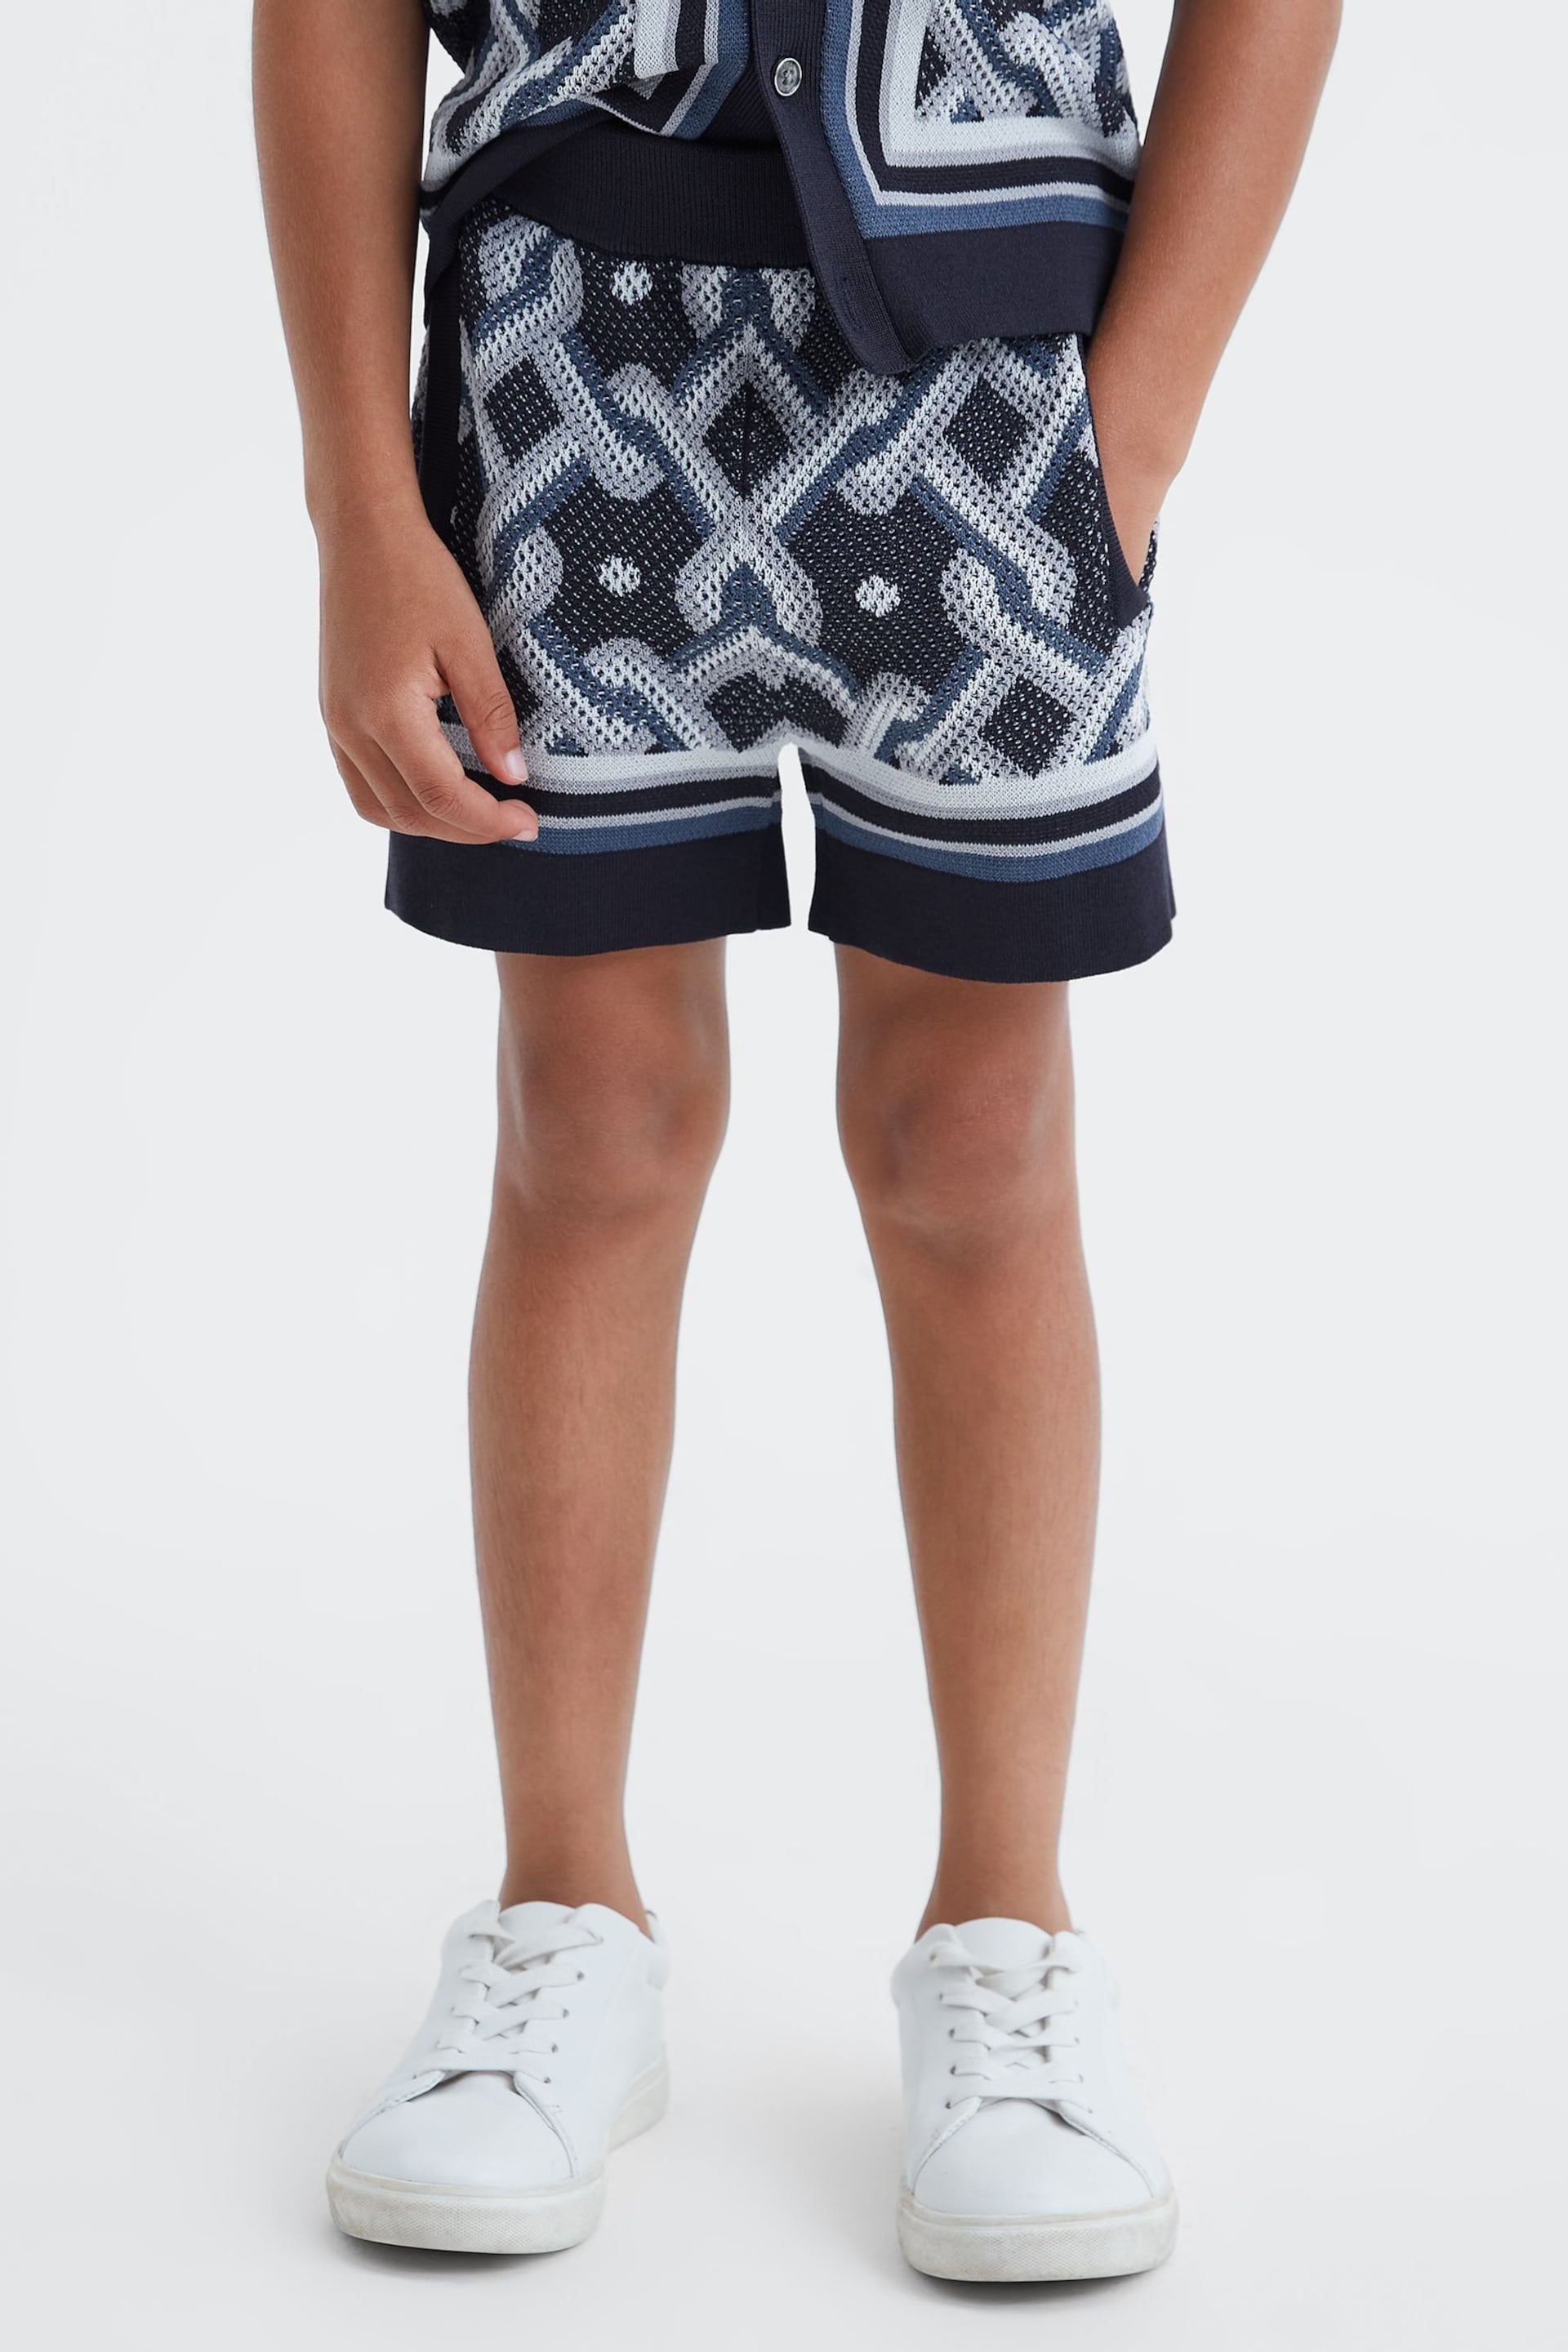 Reiss Navy Multi Jack Teen Knitted Elasticated Waistband Shorts - Image 3 of 6